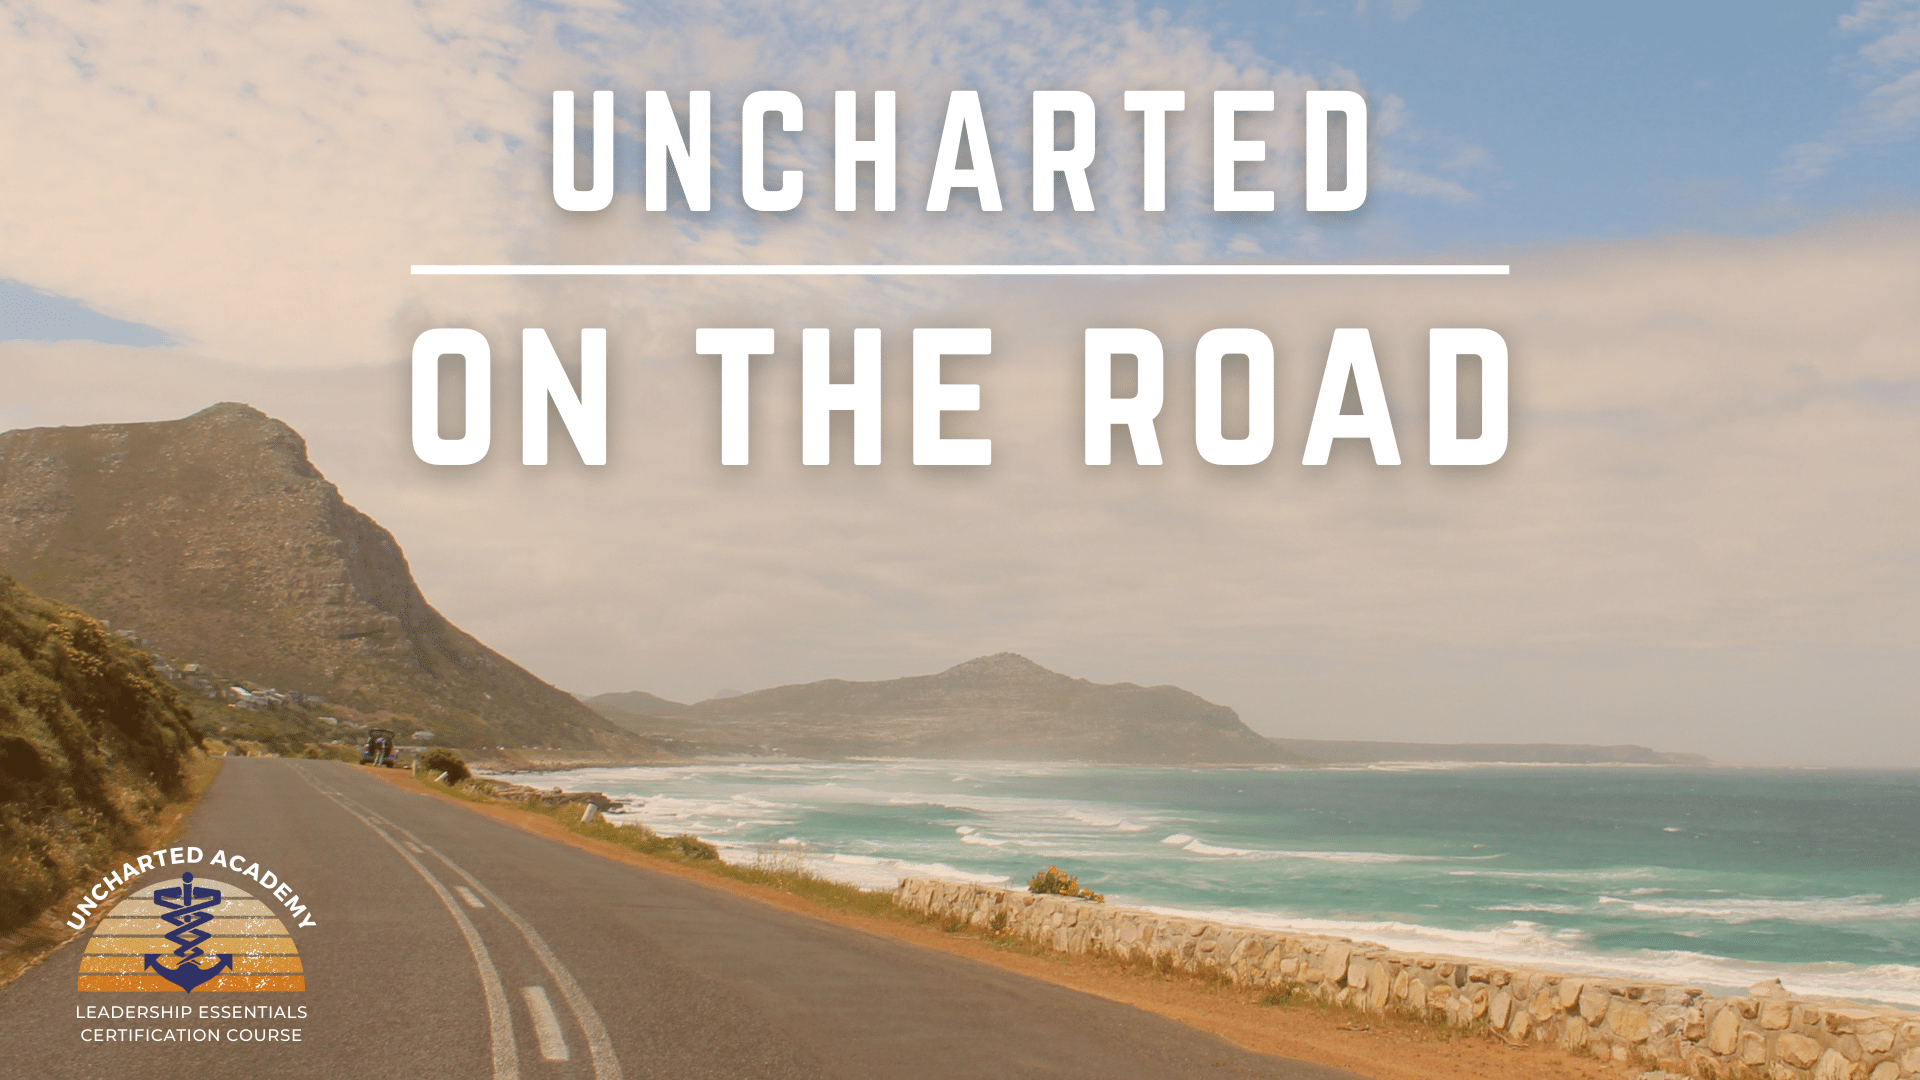 photo of a road next to the ocean with text Uncharted On The Road